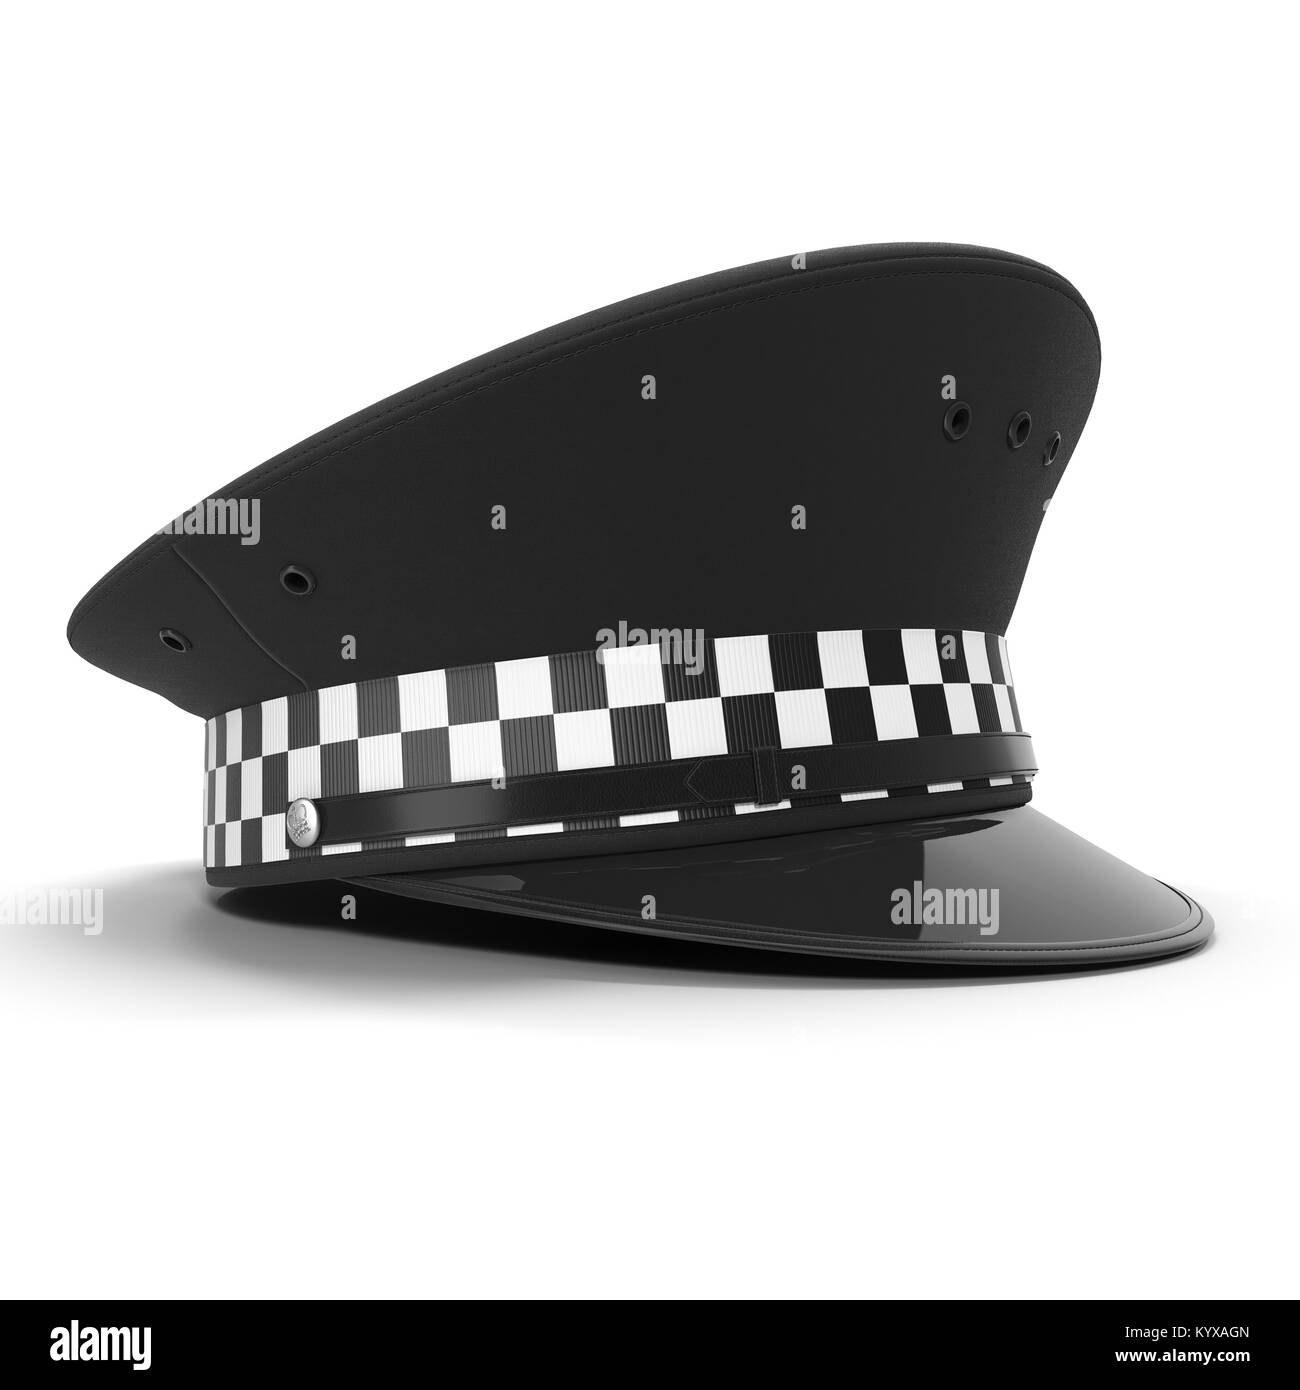 Police officer and dress uniform Black and White Stock Photos & Images ...